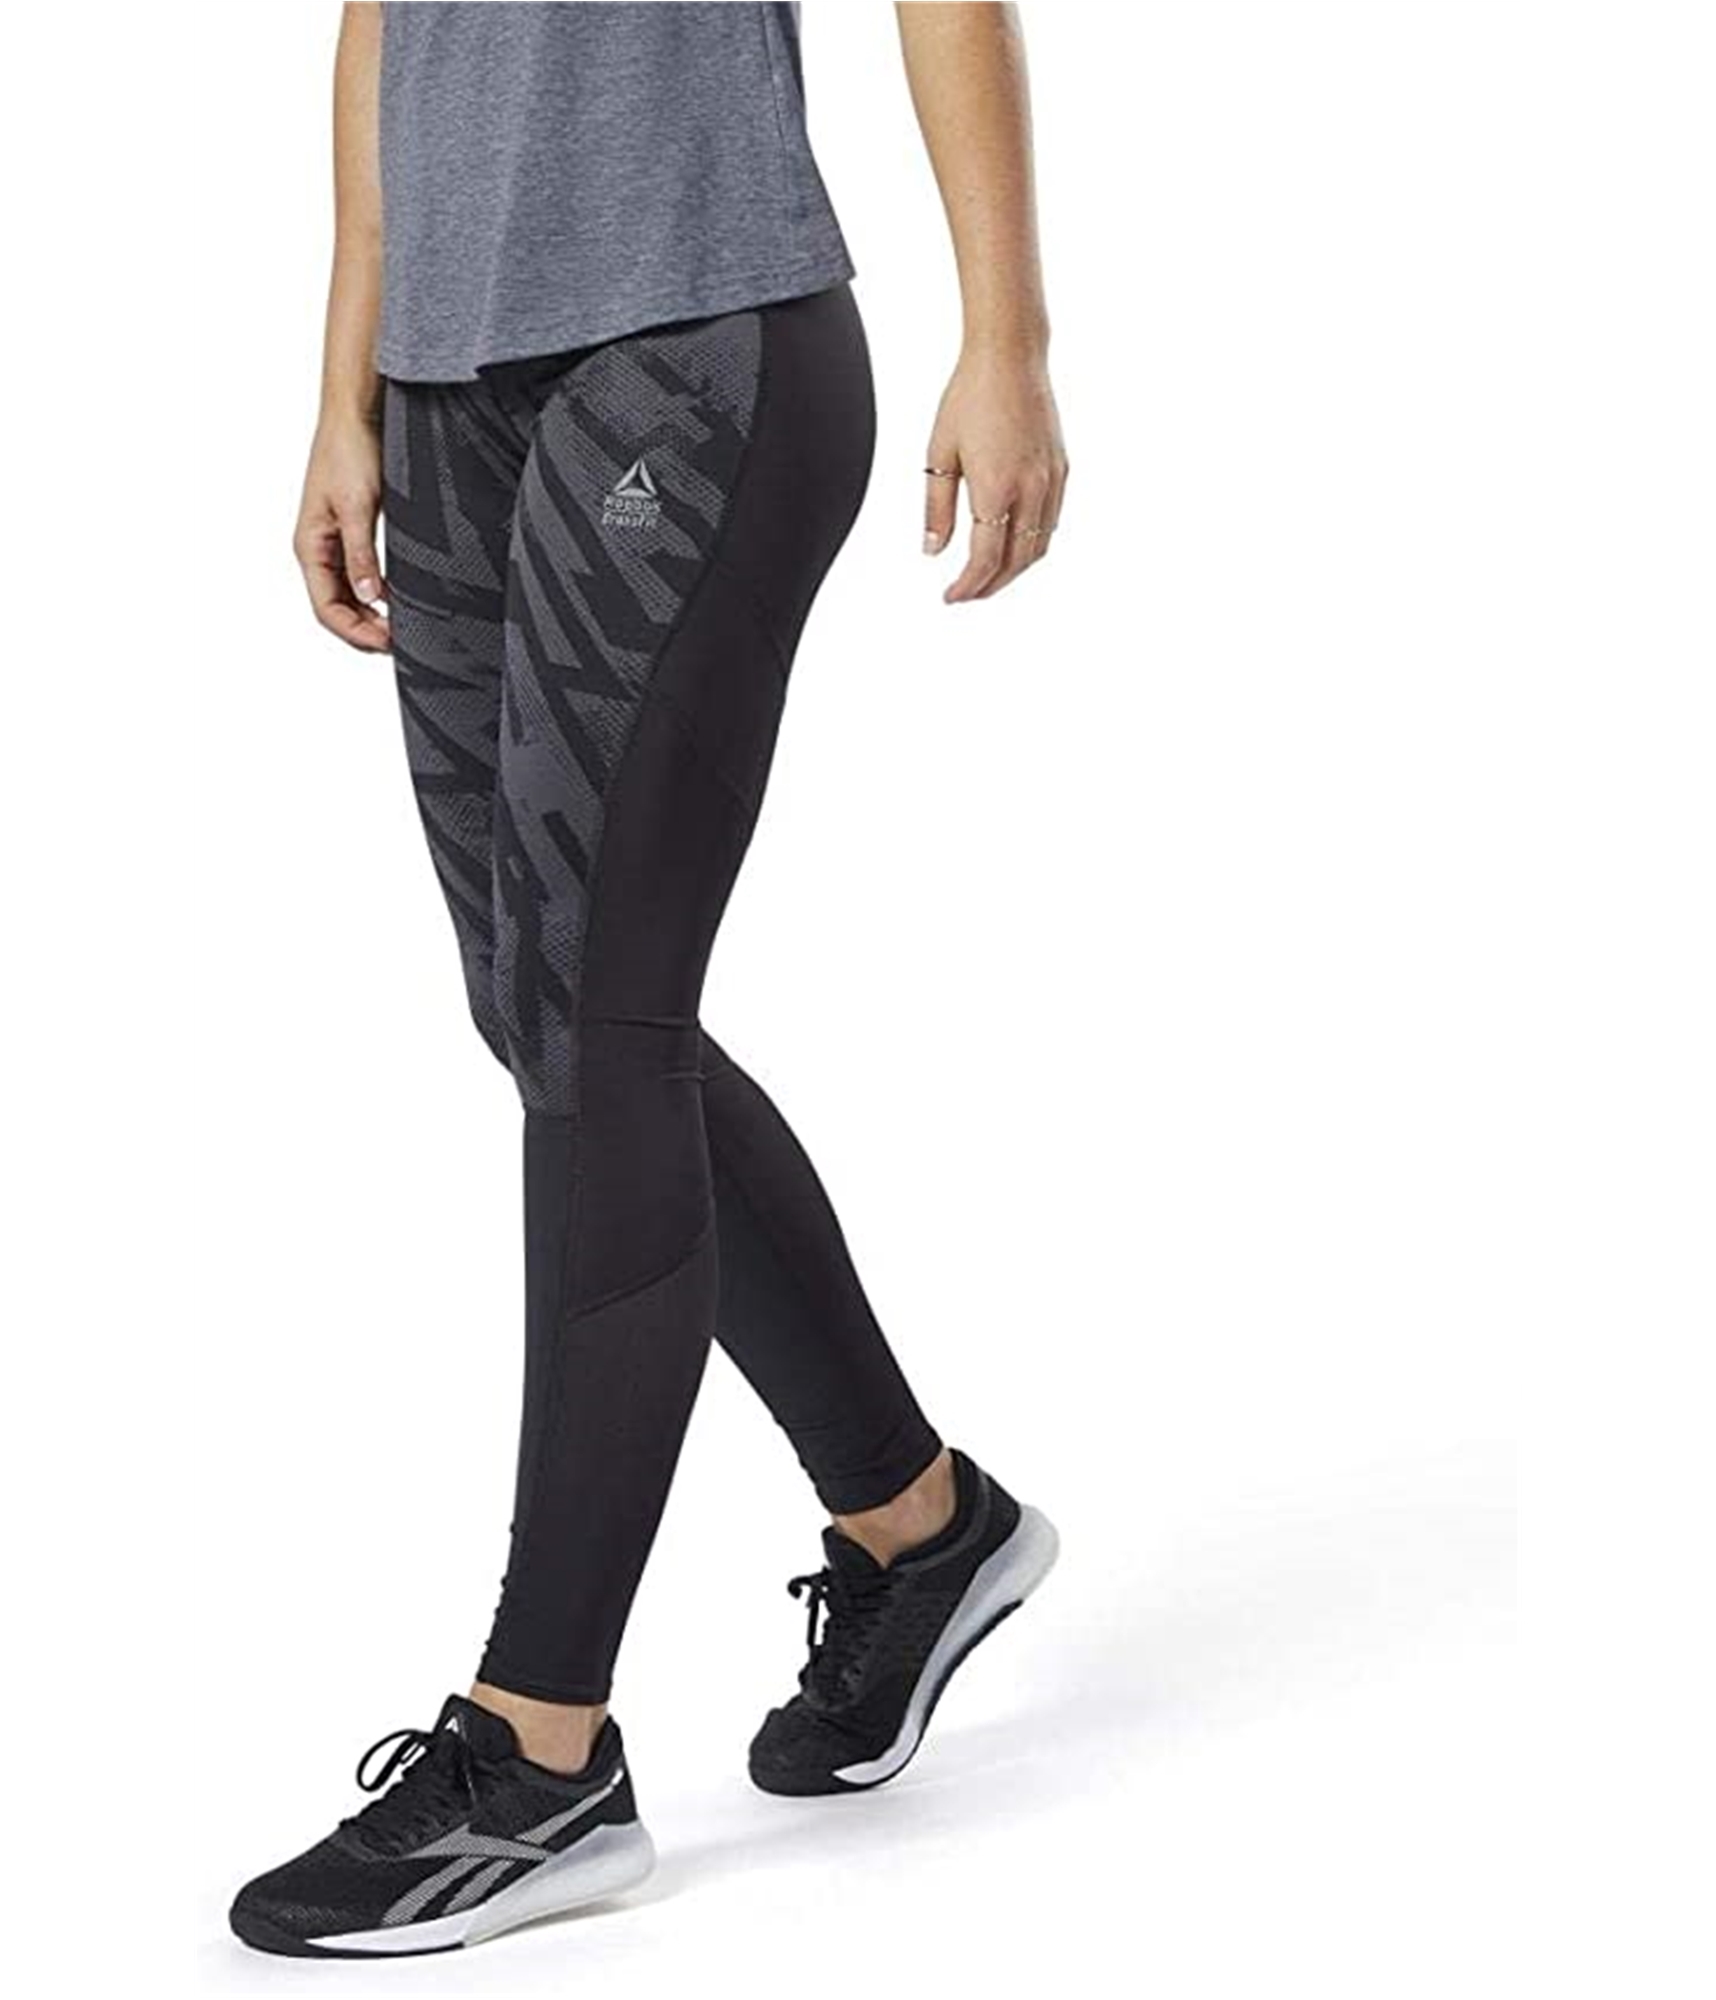 Buy a Womens CrossFit Tight Pants Online | TagsWeekly.com